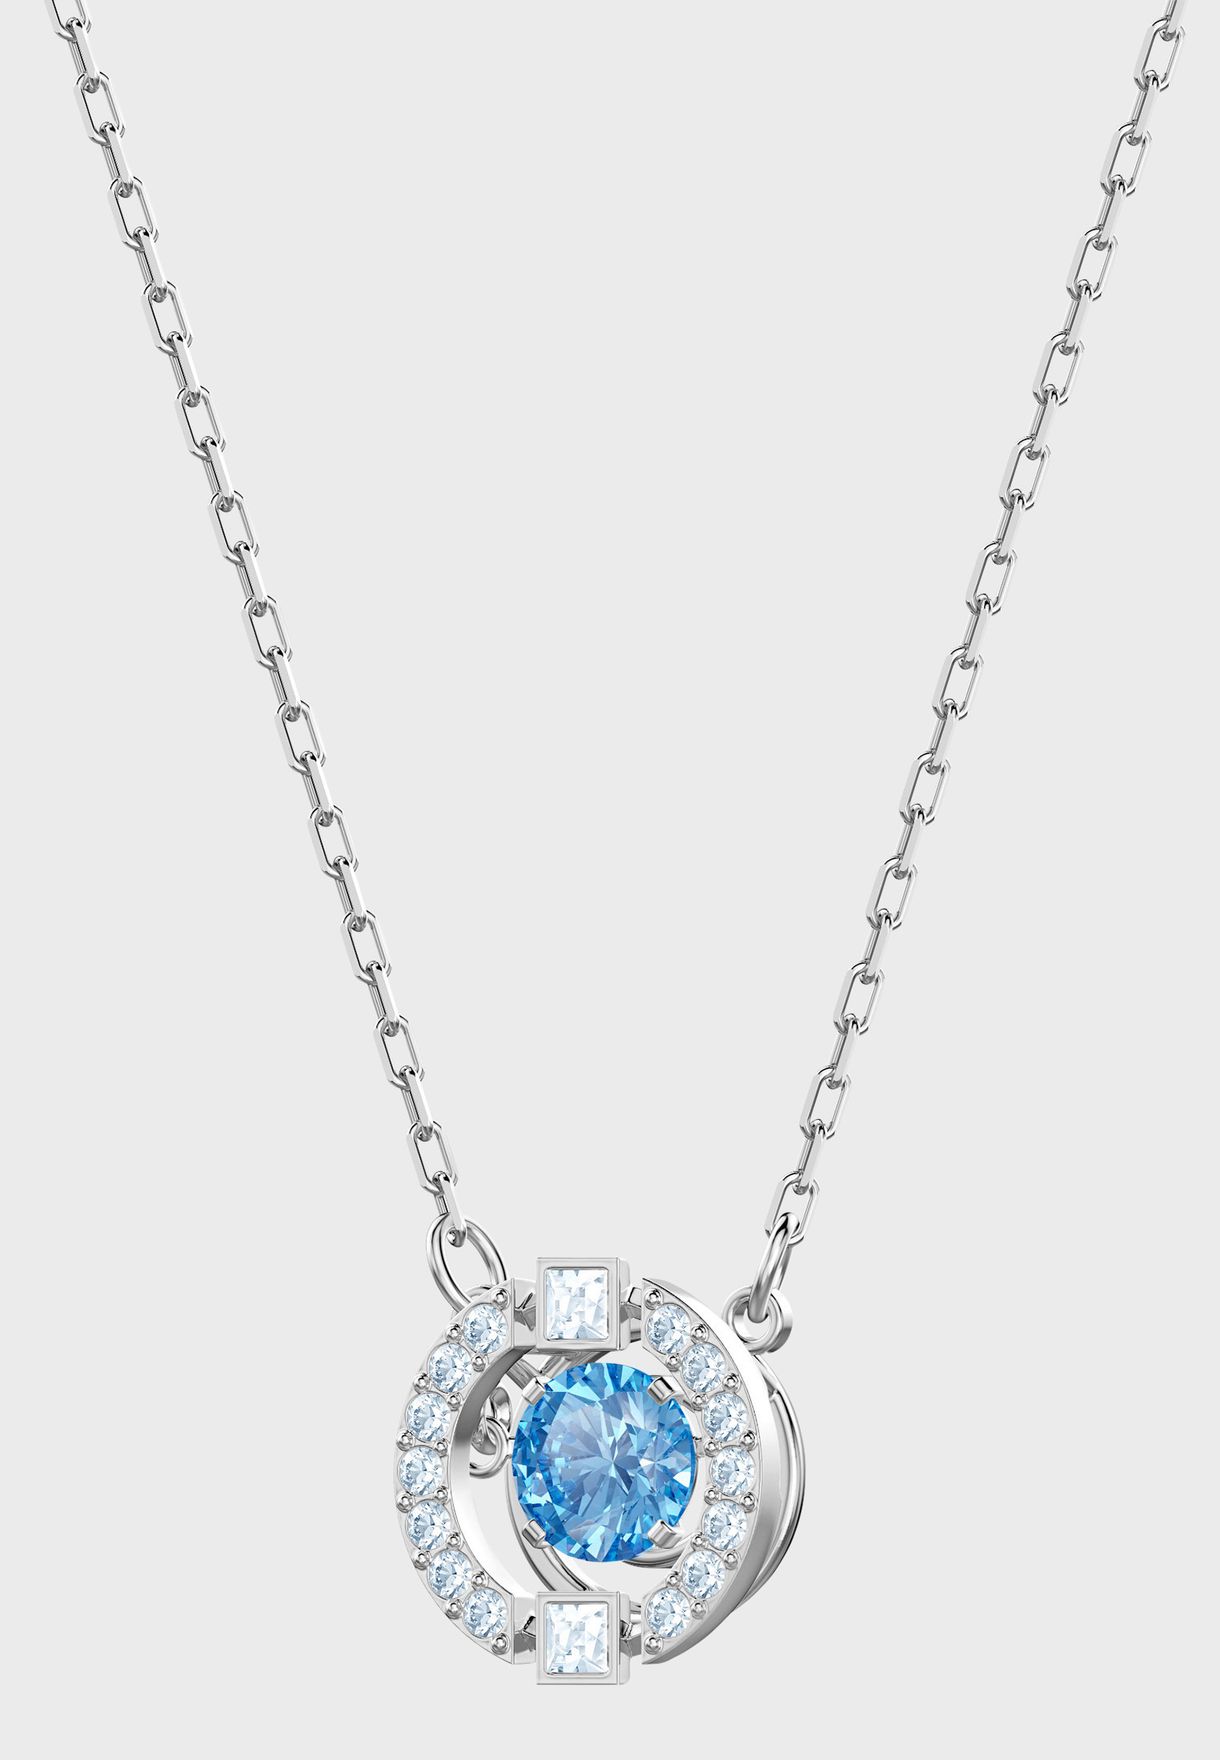 Sparkling Round Pendent Necklace+Earrings Set